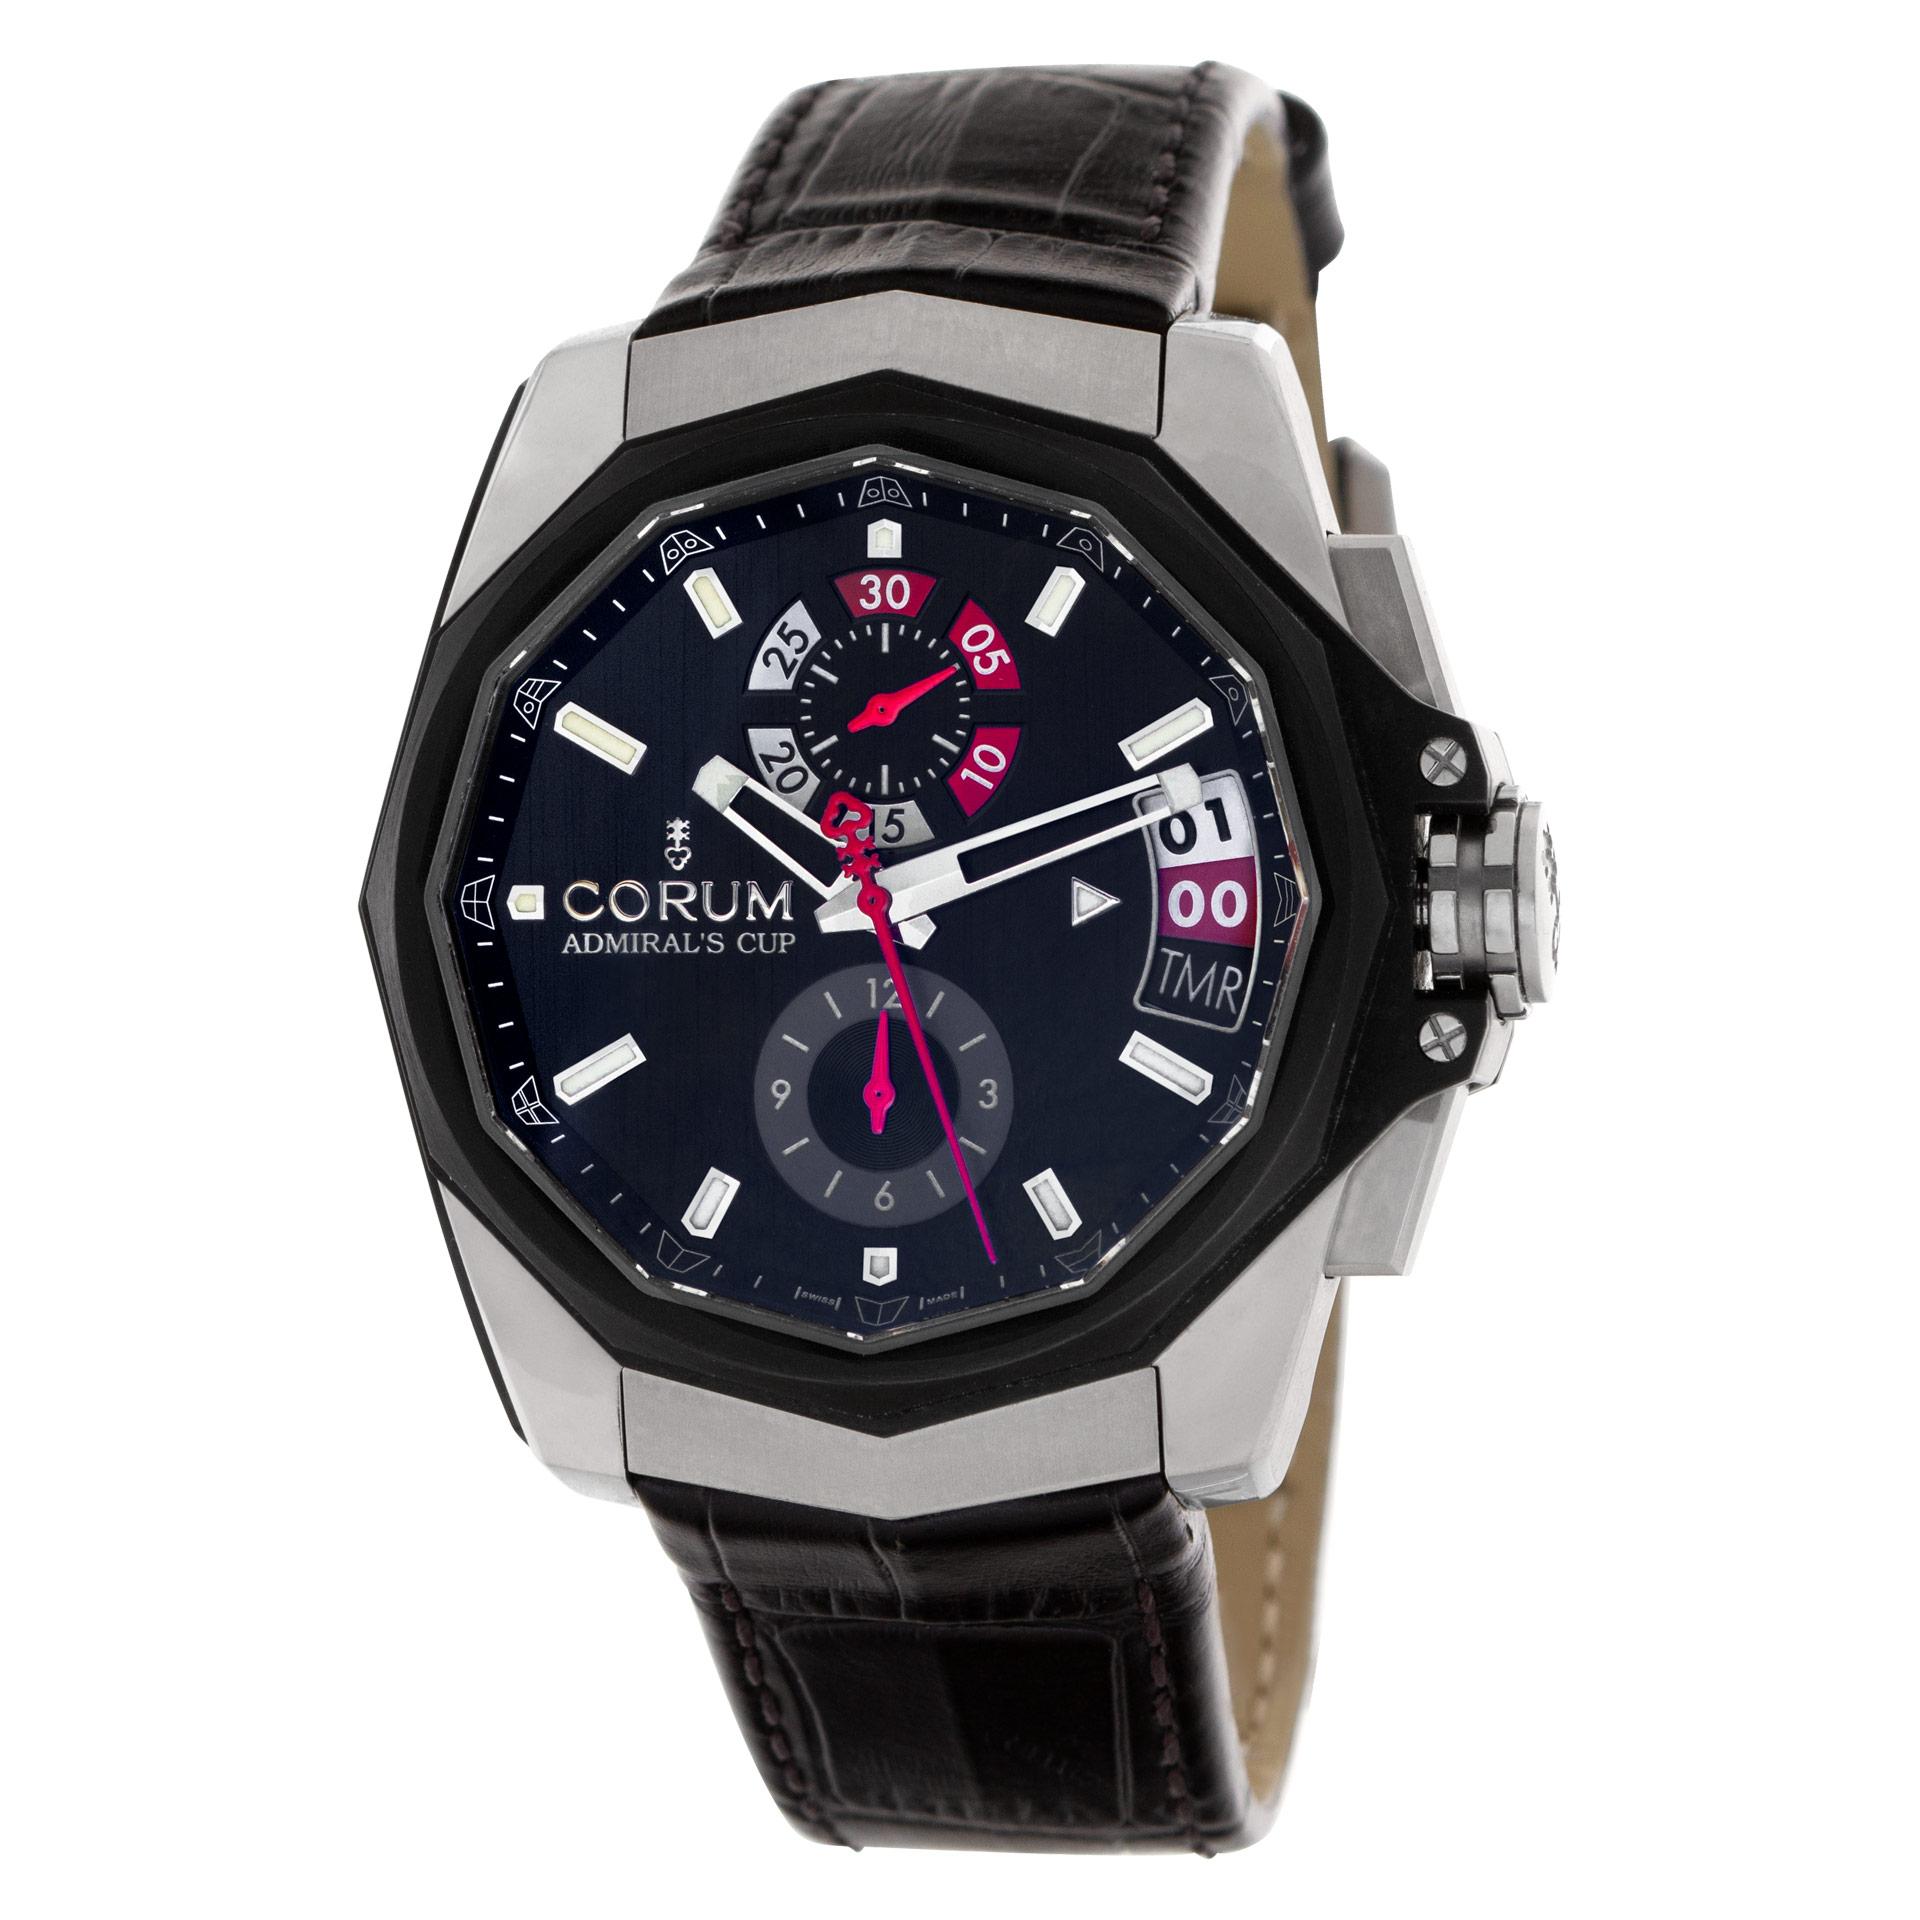 Corum Admirals Cup AC-One Chronograph 45 Regatta in titanium on a crocodile strap with deployant buckle. Auto w/ chronograph. 45 mm case size. With box and papers. Ref 040.101.04/0F01 AN10. Fine Pre-owned Corum Watch.

 Certified preowned Sport